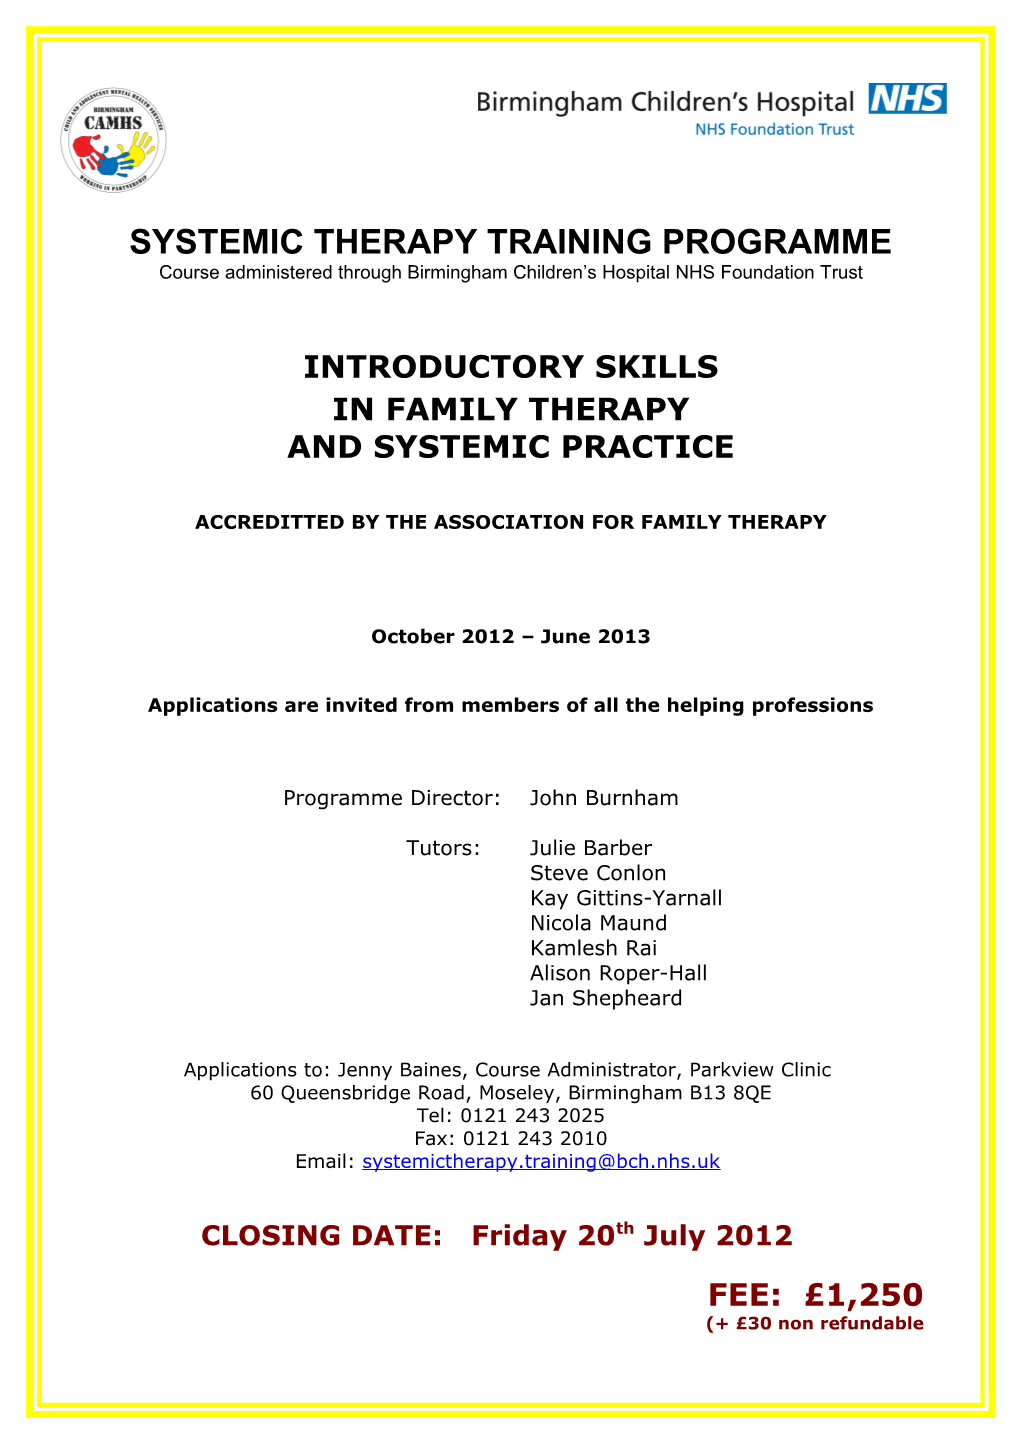 Training in Family Therapy and Systemic Practice